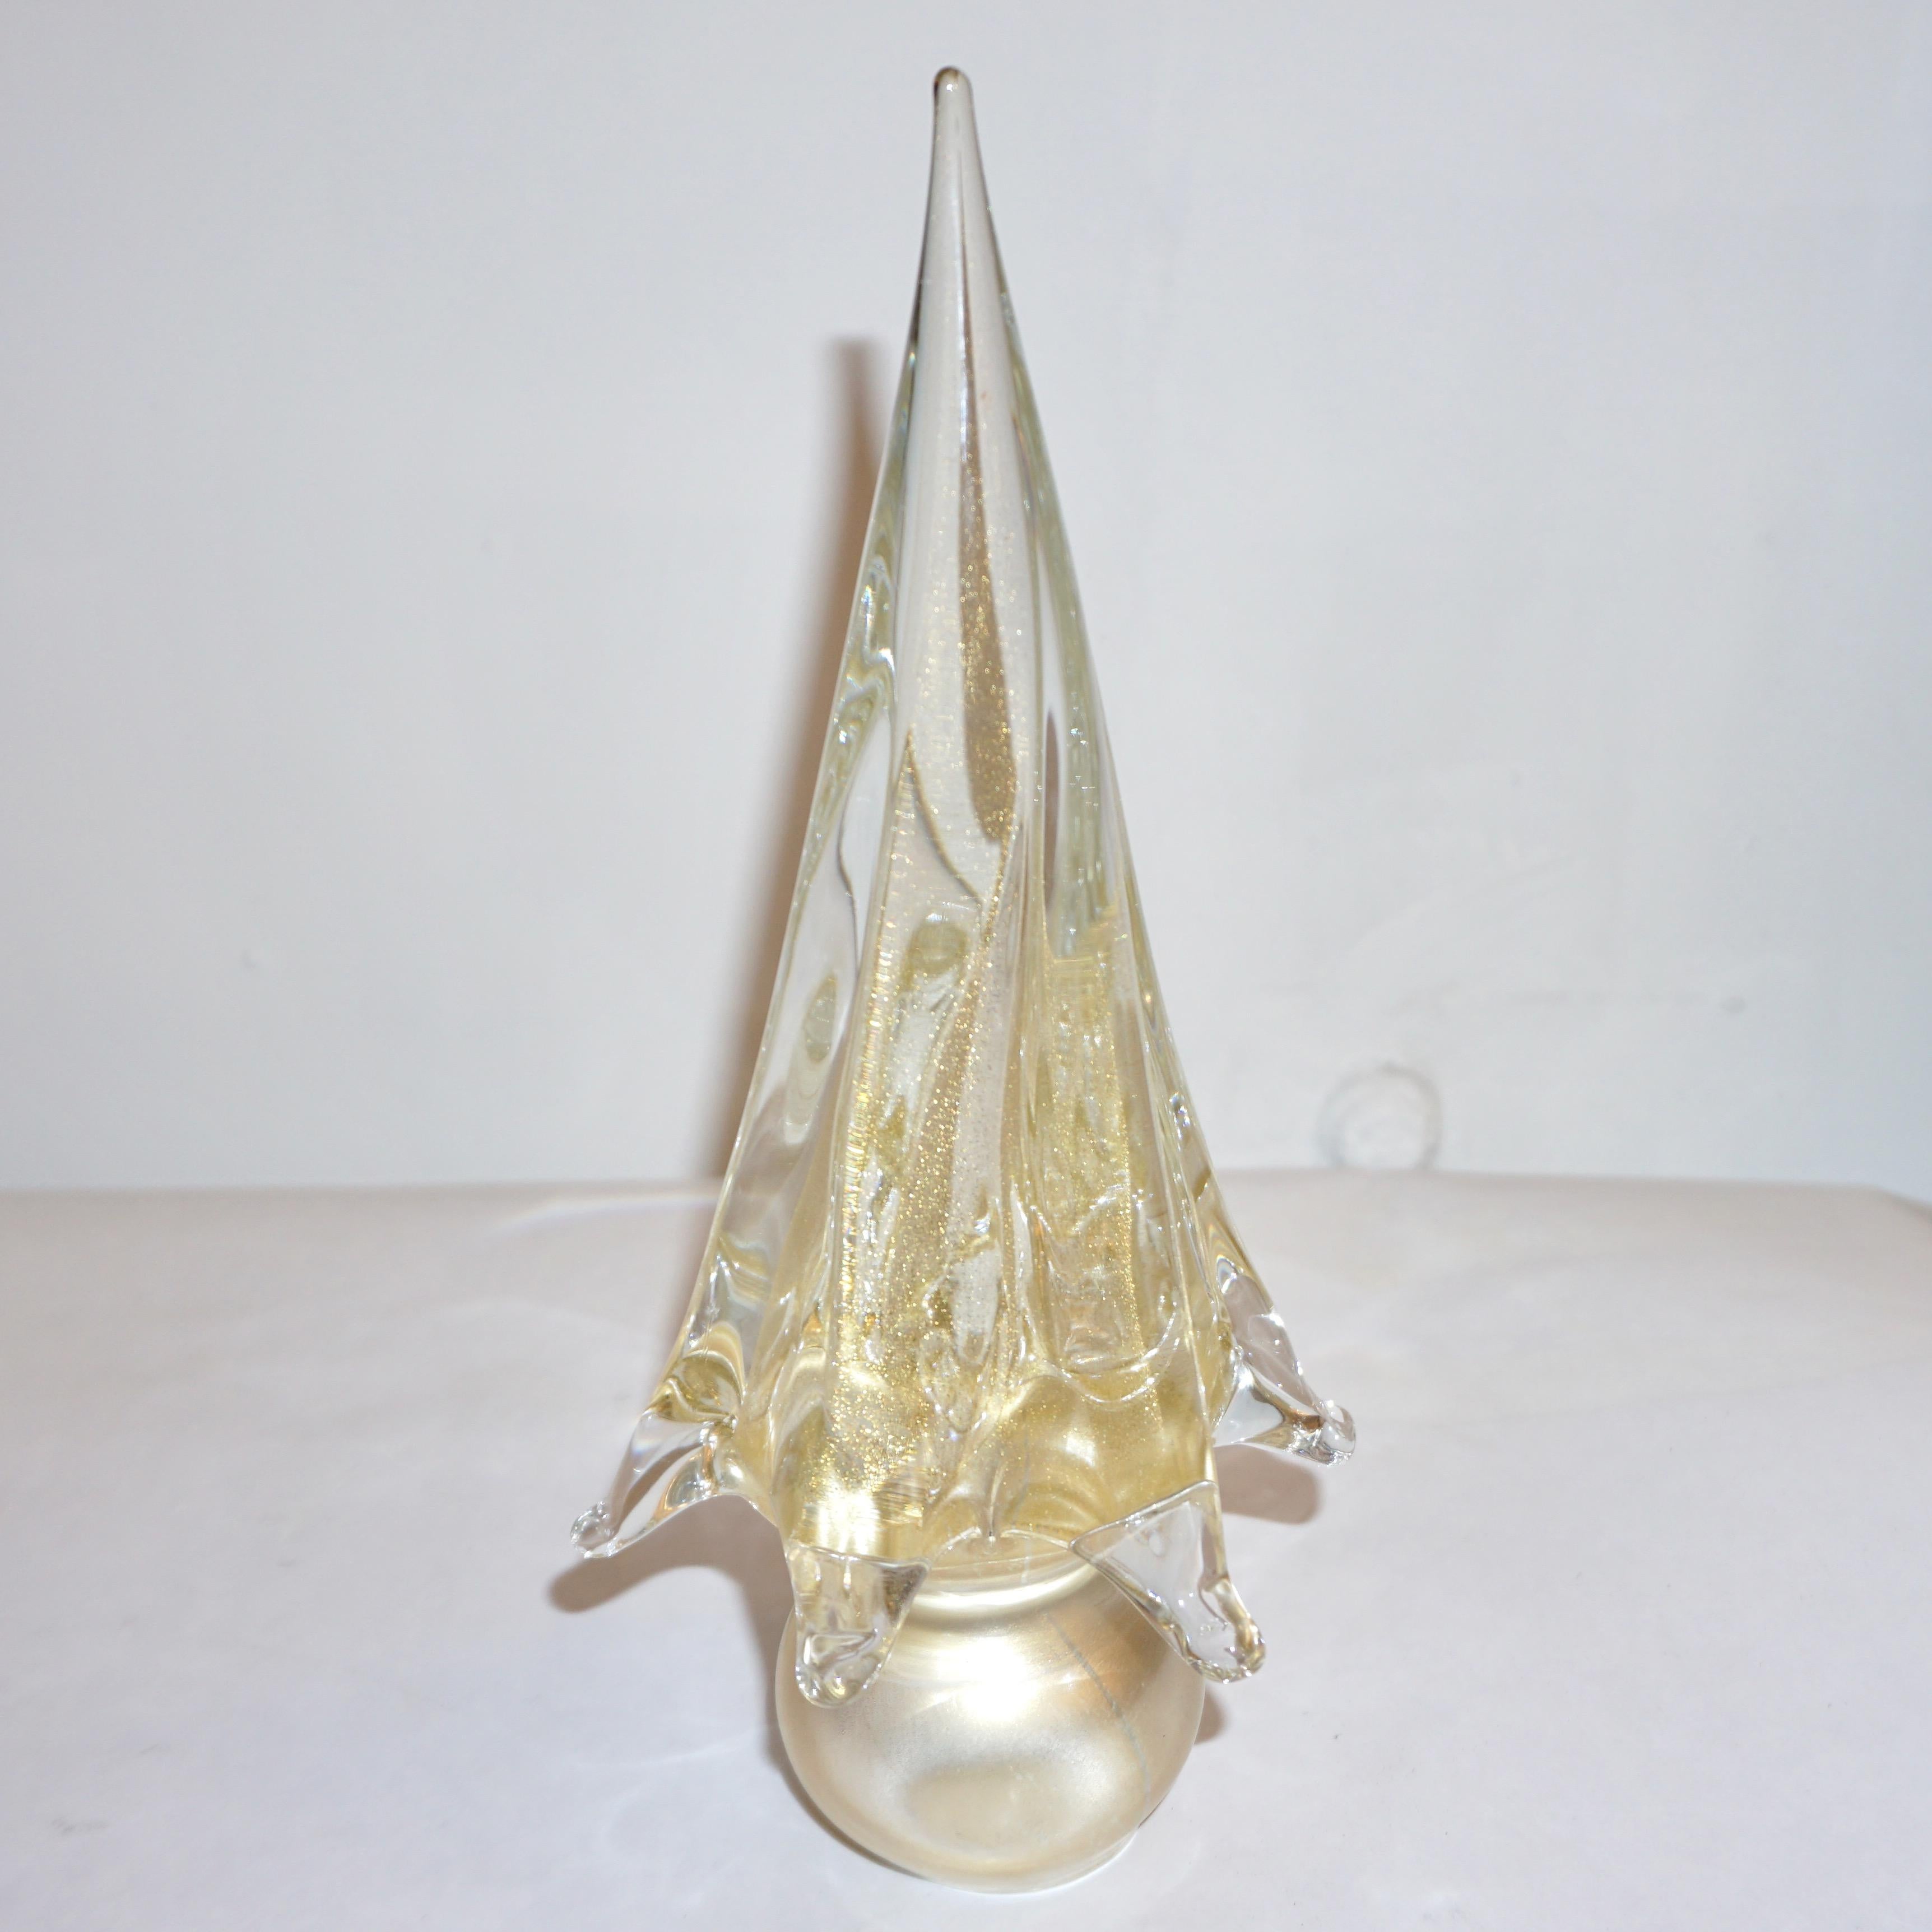 Murano glass tree of organic sleek modern design, a vintage creation by the Venetian company Formia, signed pieces, individually mouth blown and handcrafted. Made precious by the use of extensive pure 24-karat gold and handcrafted with twist in the